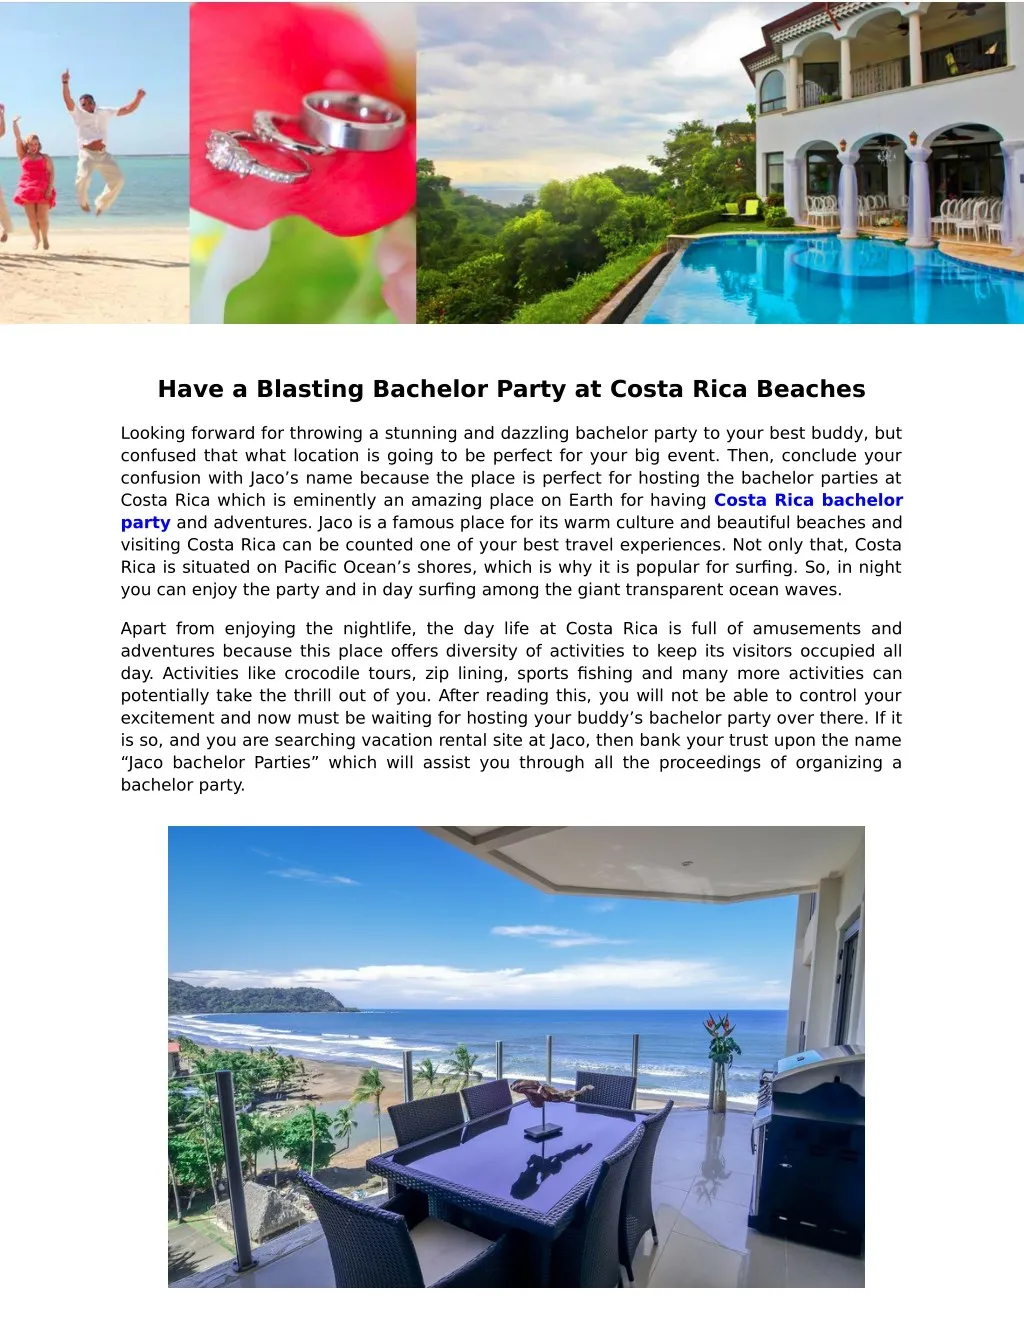 have a blasting bachelor party at costa rica